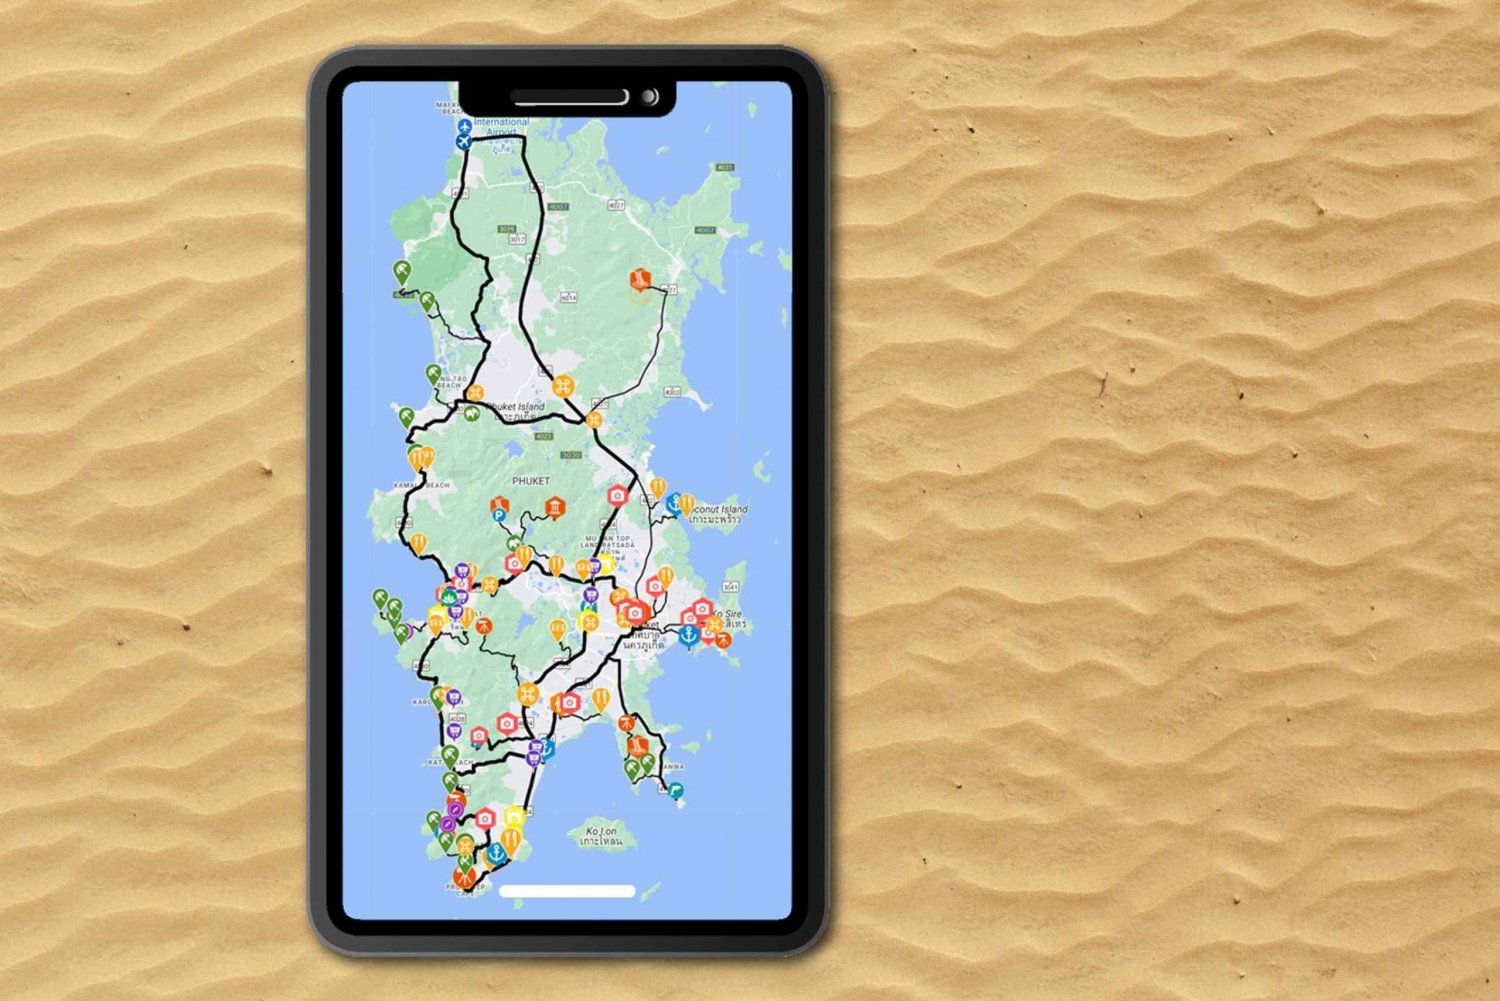 Phuket: Island Exploration Guide App with Offline Content